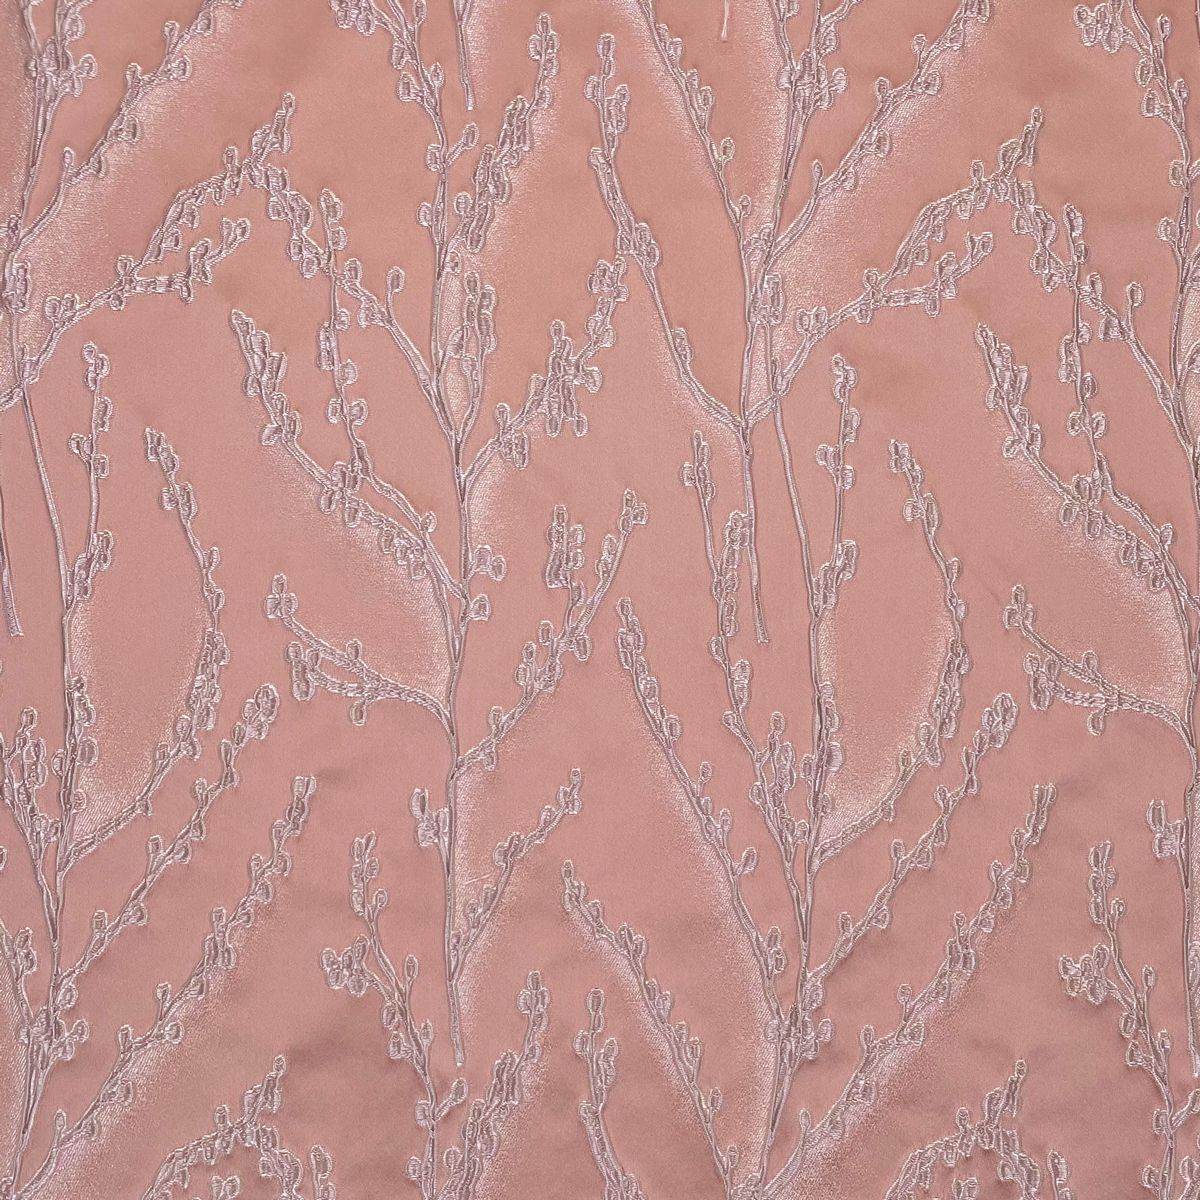 Everglade Rose Fabric by Chatham Glyn